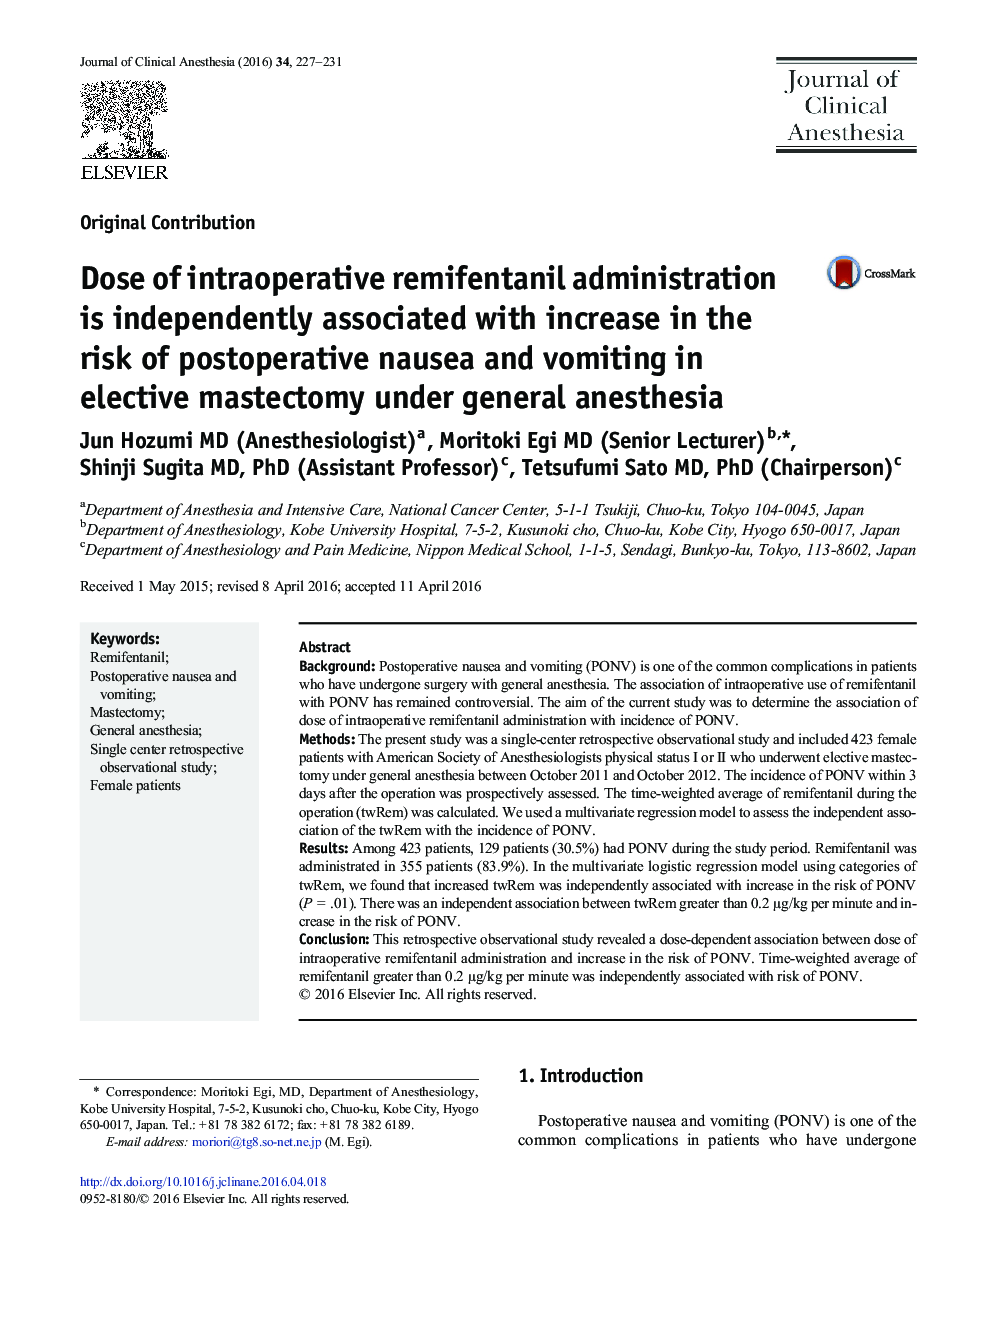 Dose of intraoperative remifentanil administration is independently associated with increase in the risk of postoperative nausea and vomiting in elective mastectomy under general anesthesia